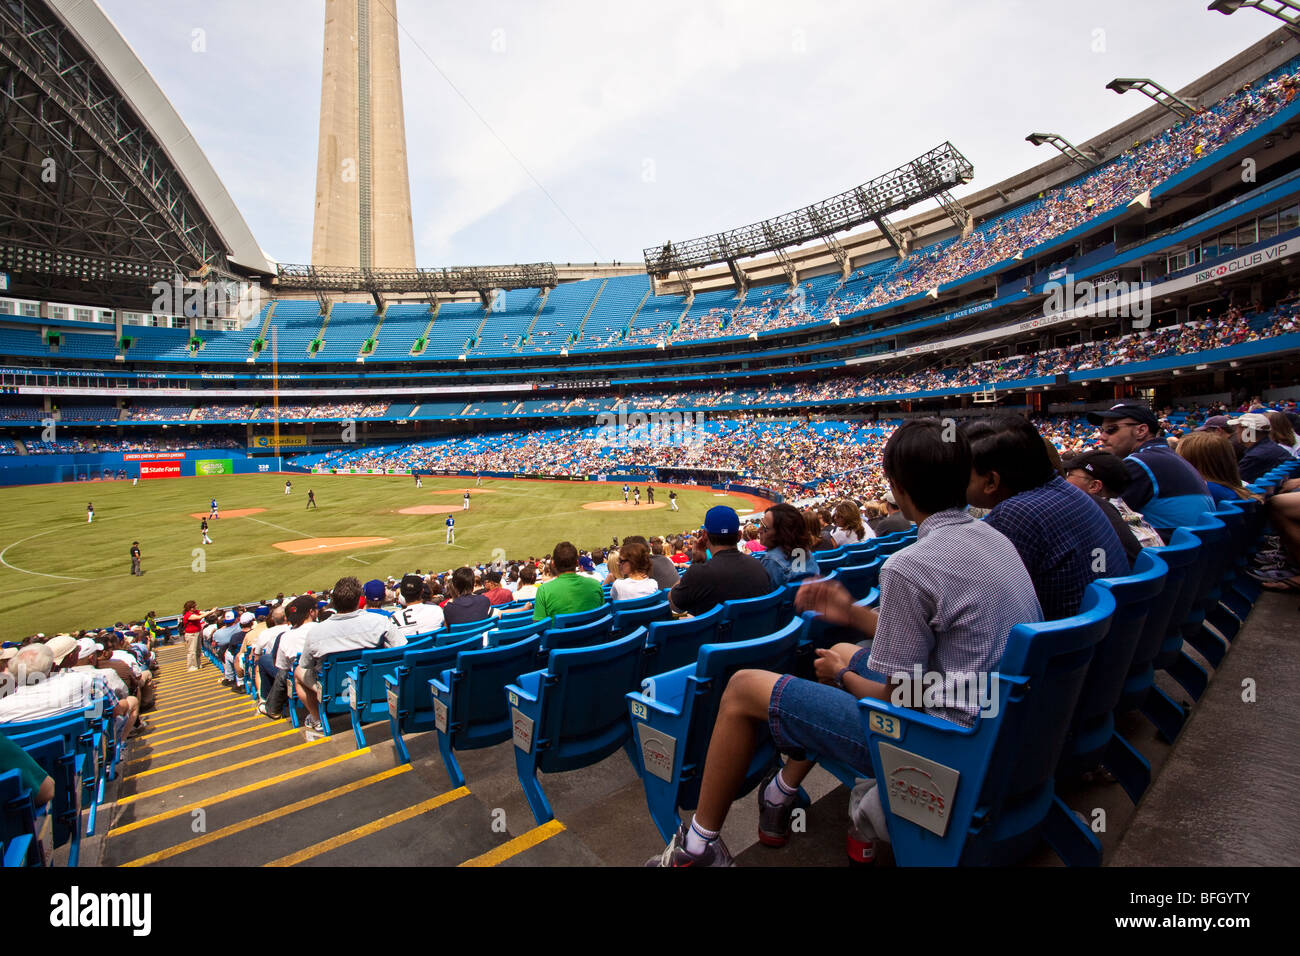 Section 127 at Rogers Centre 